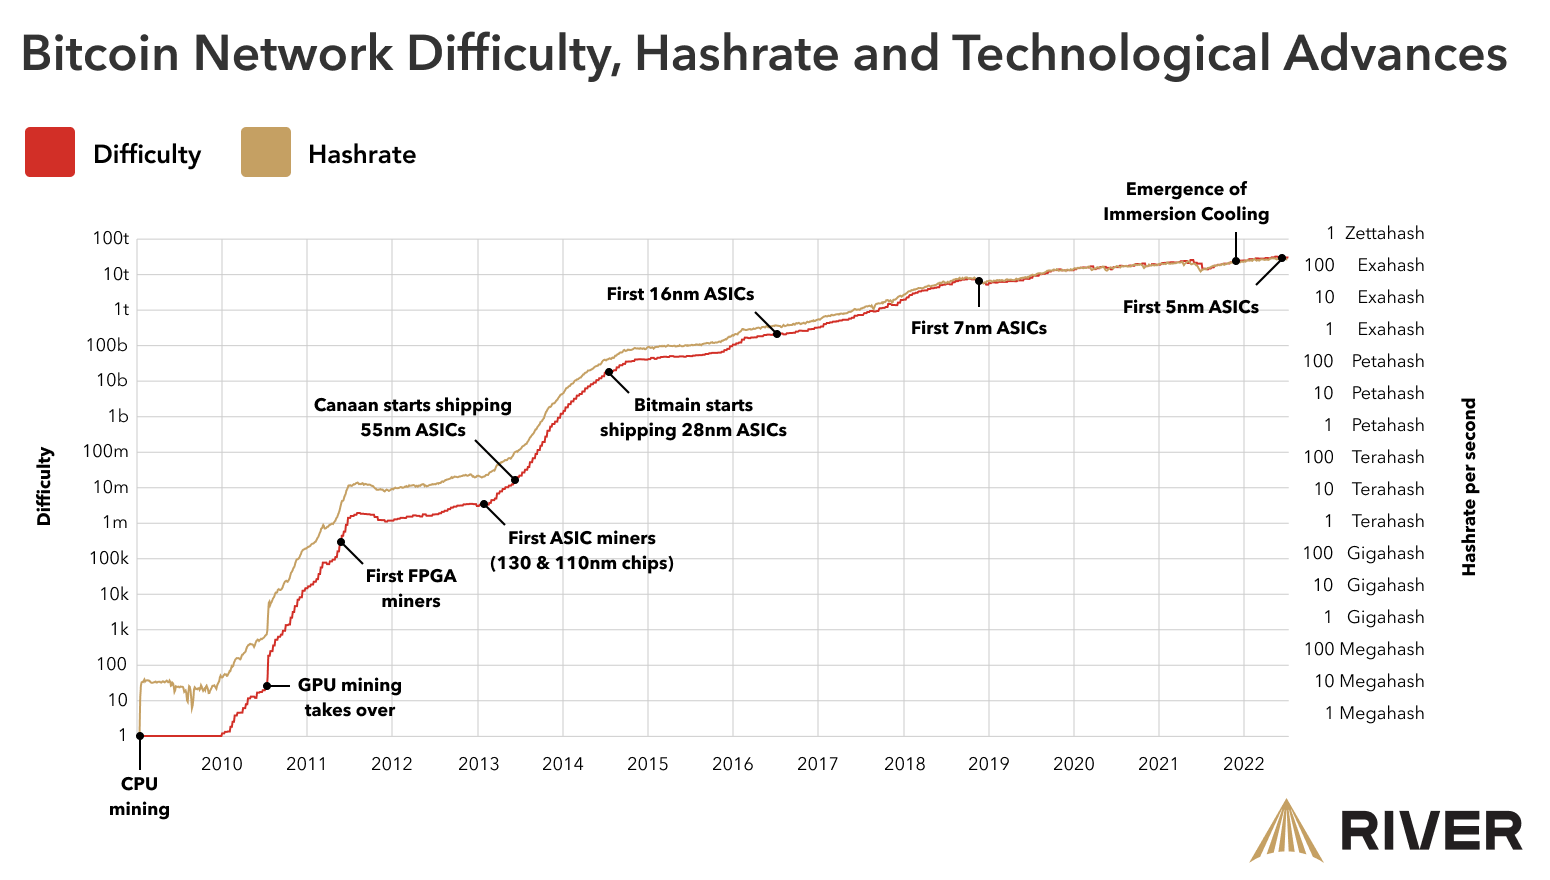 Bitcoin network difficulty, hashrate and technological advances